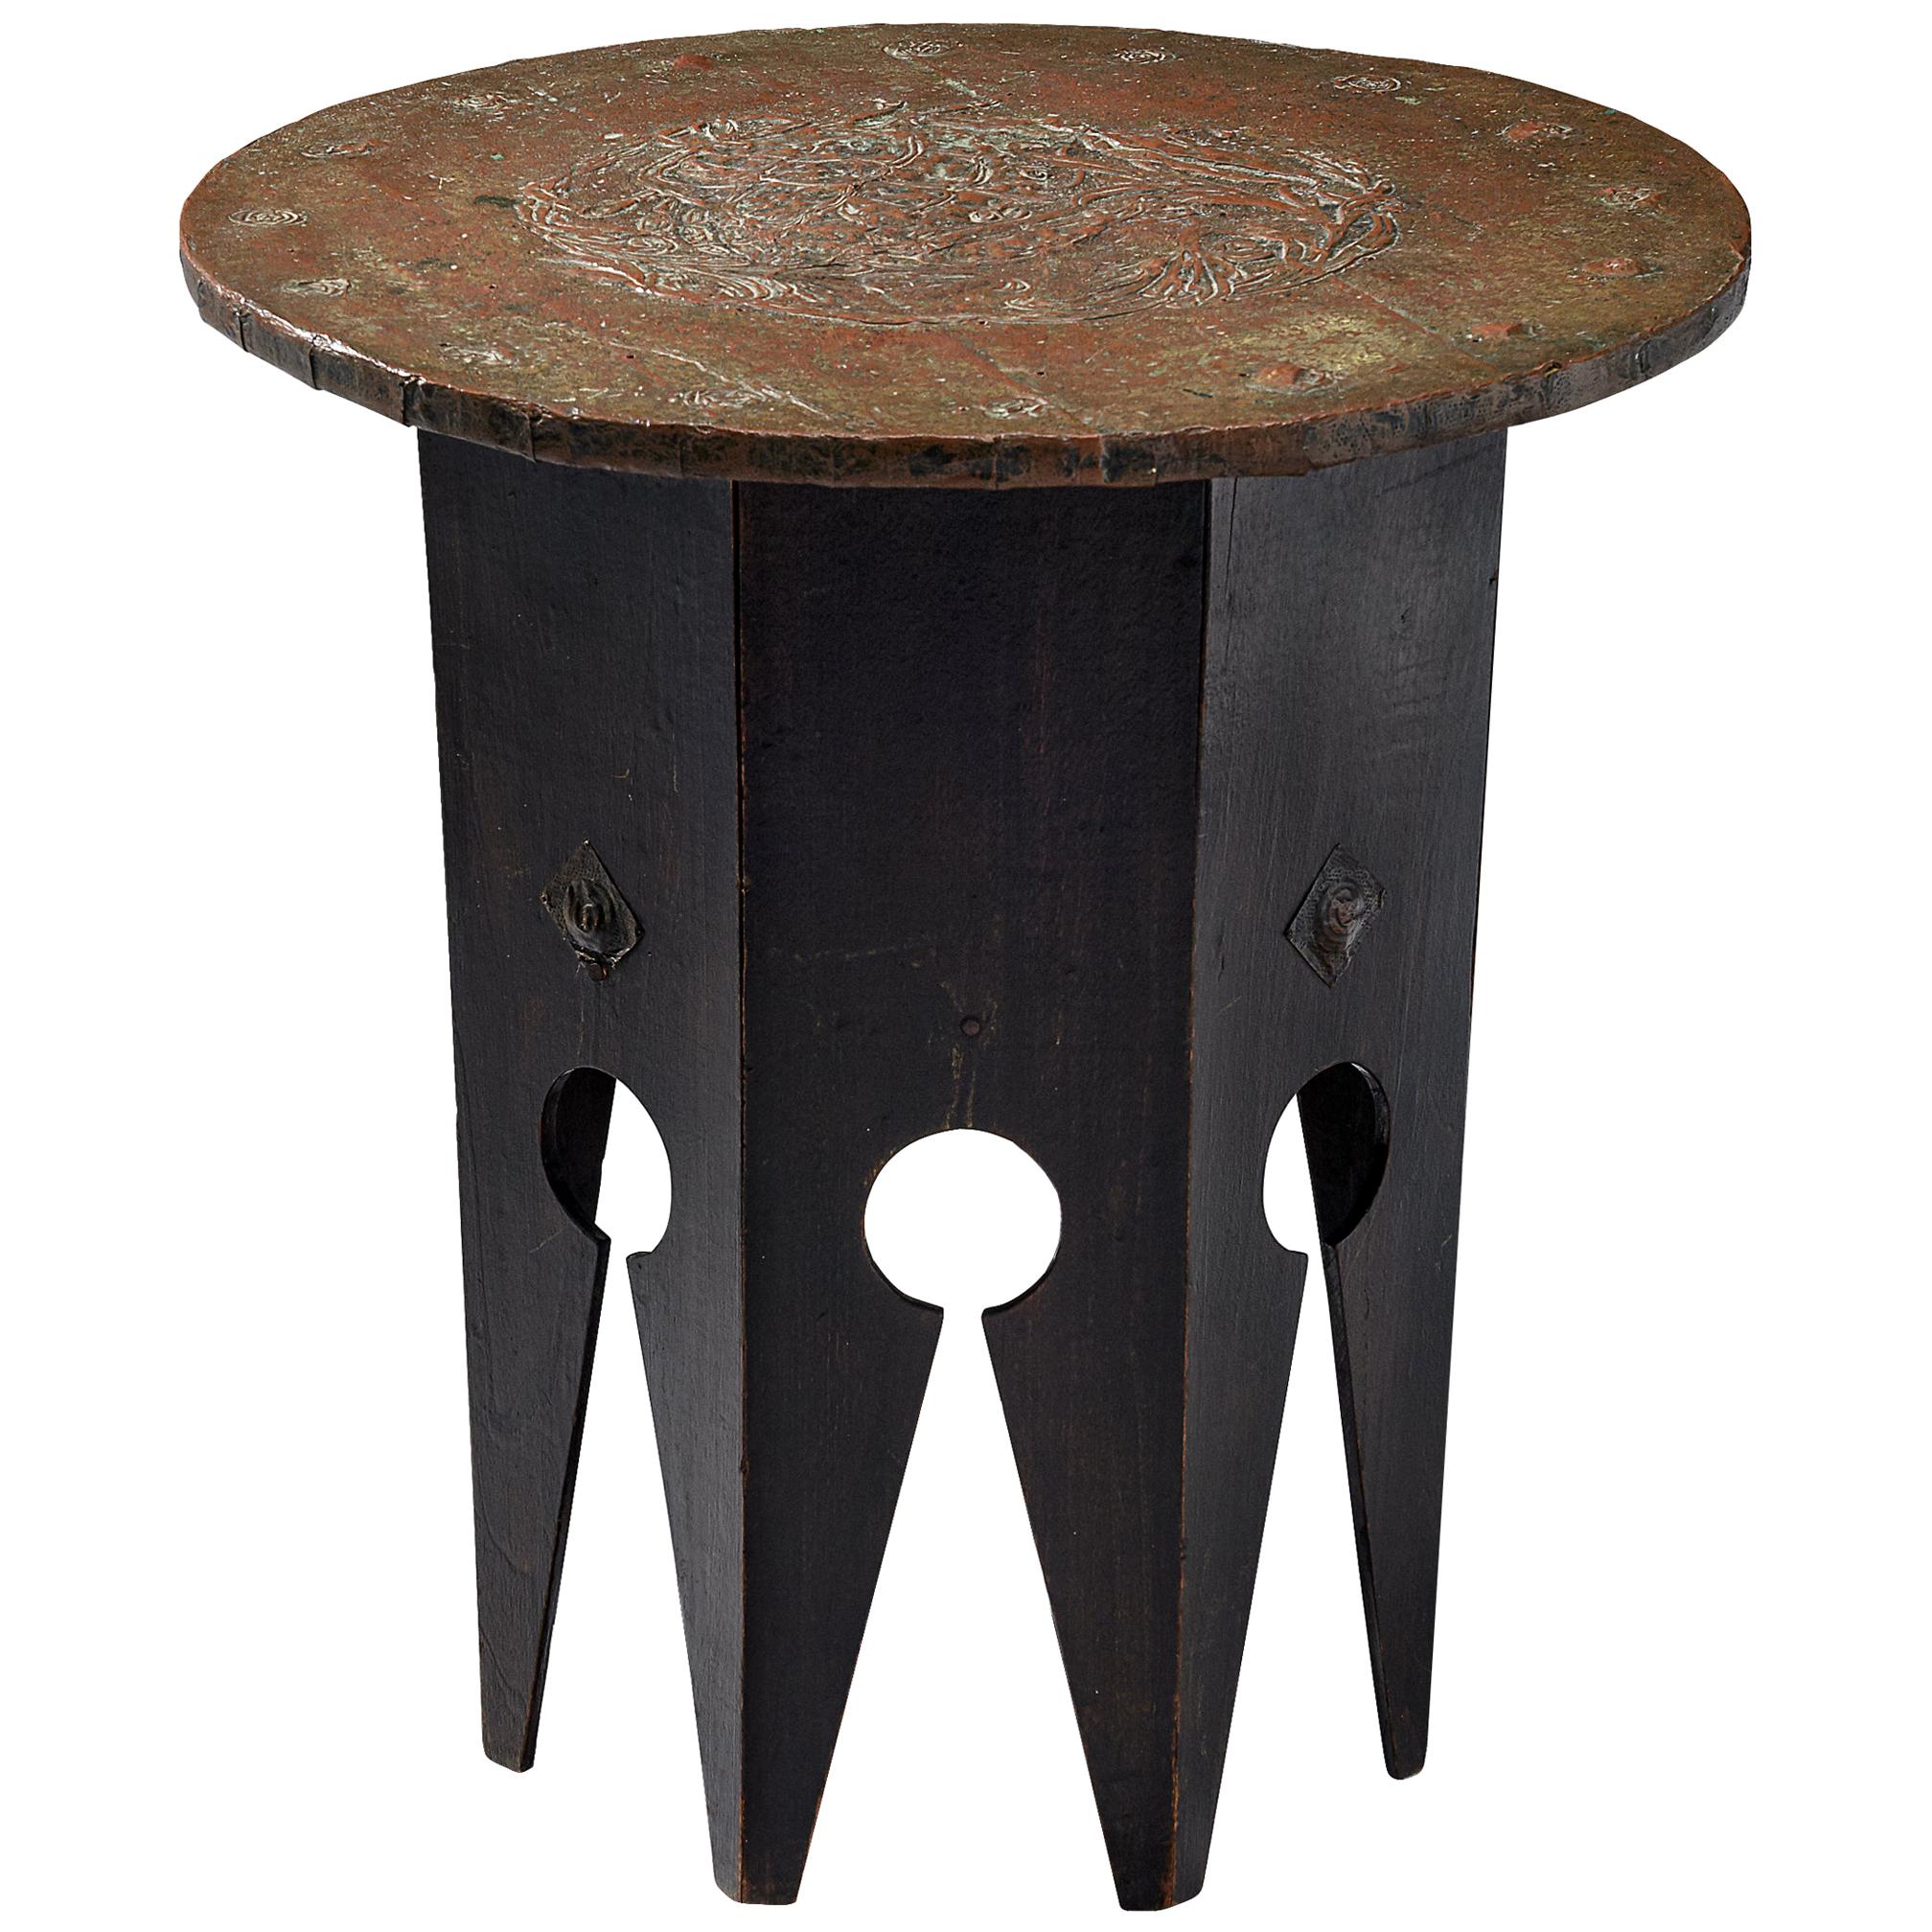 Art Deco Side Table Decorated with Stylized Roses